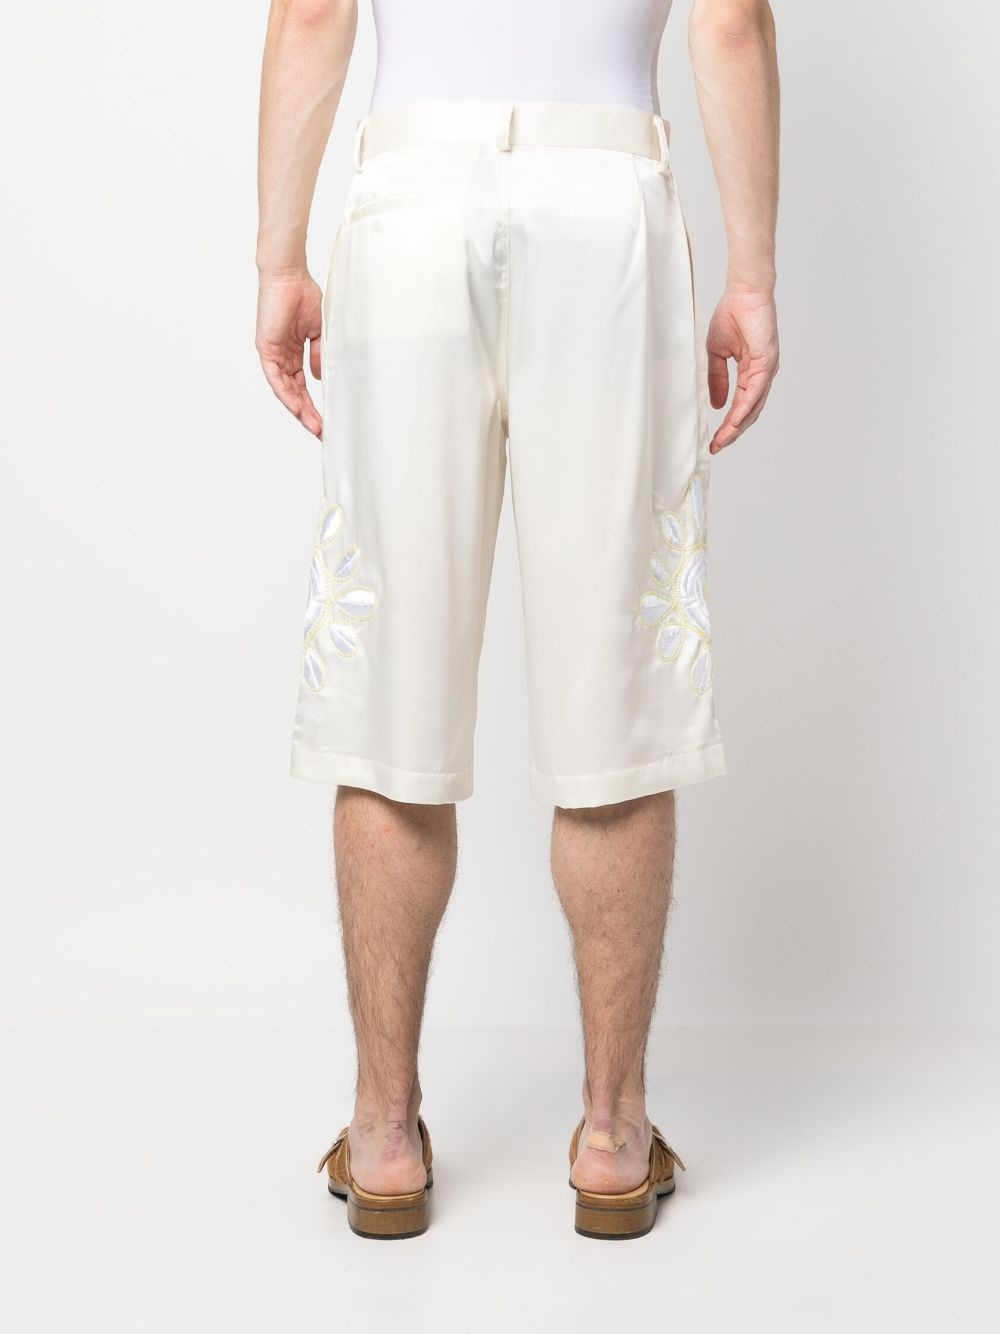 embroidered satin shorts - 4